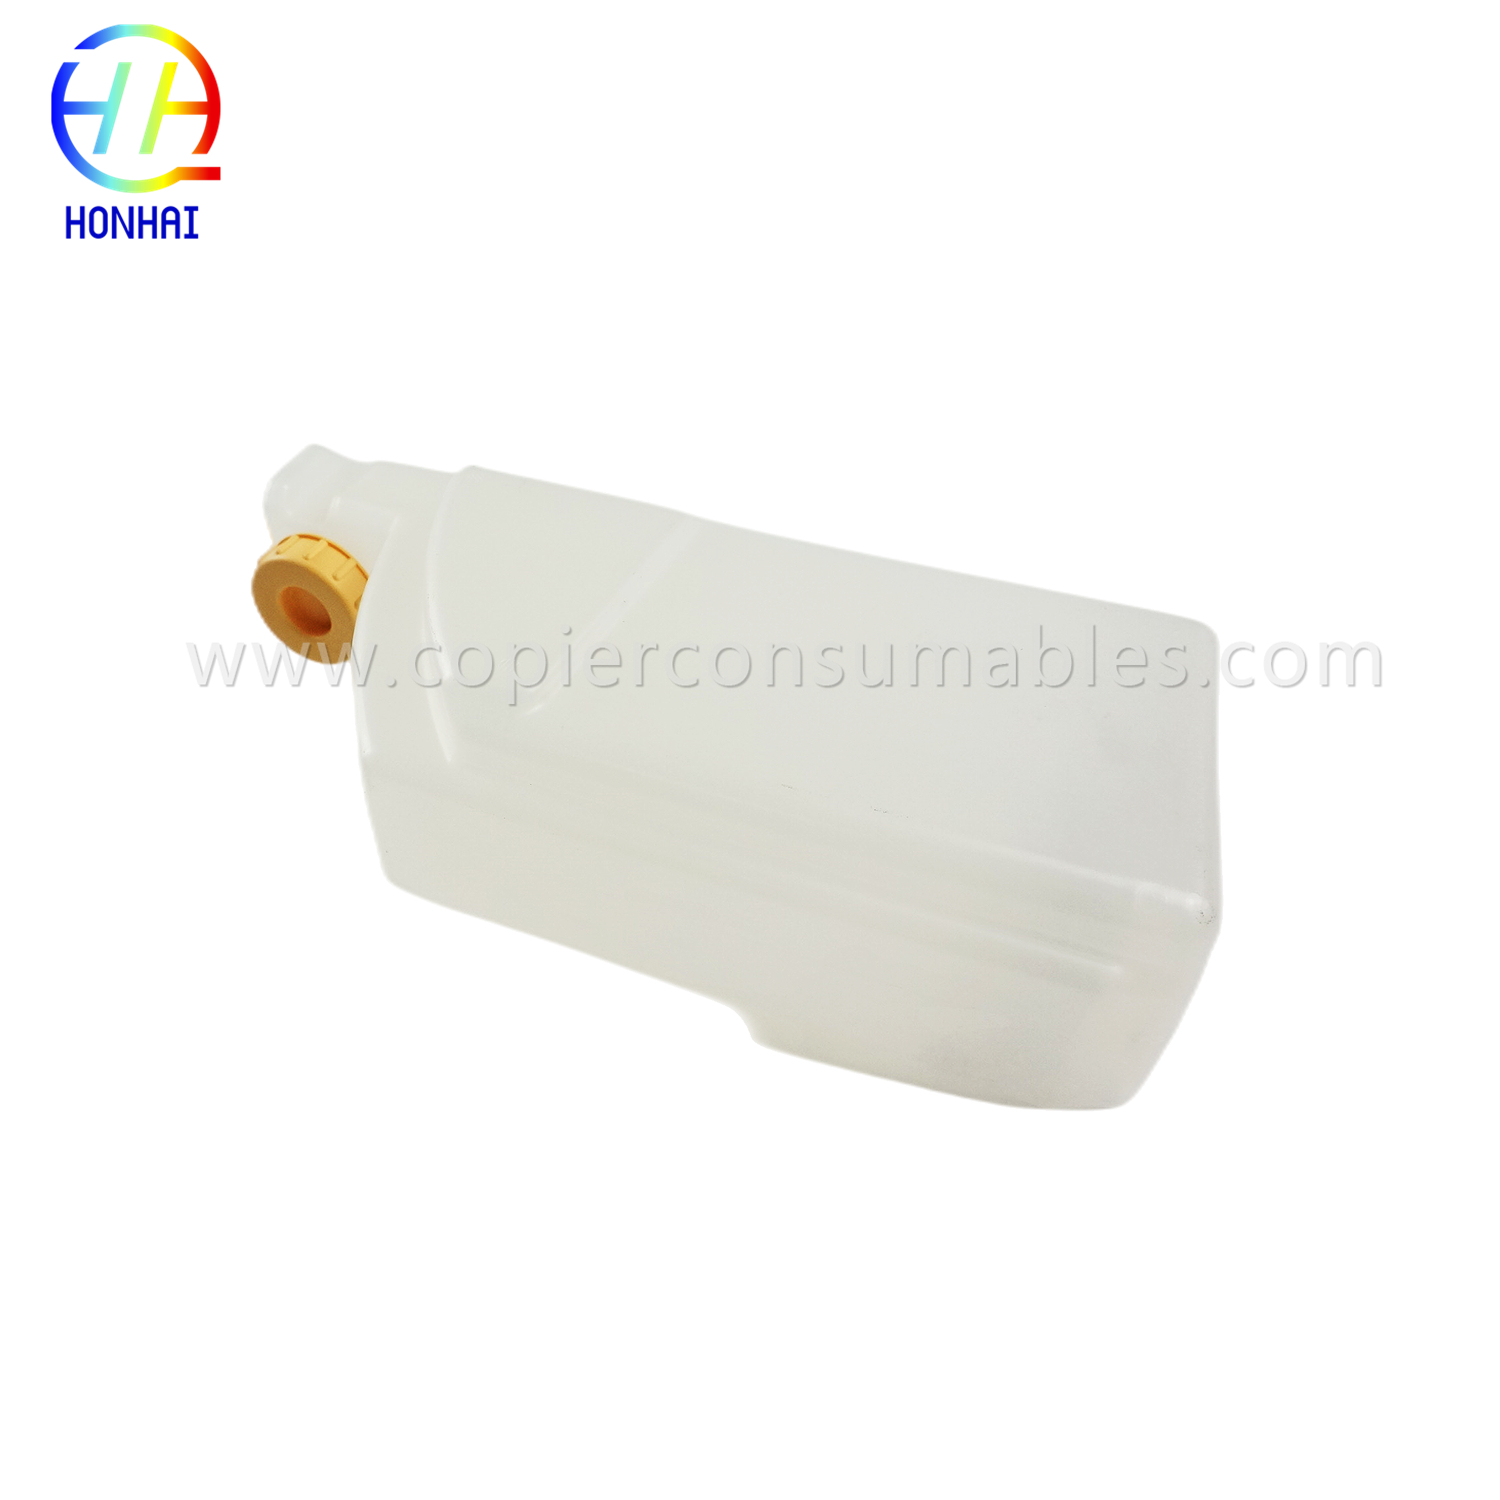 https://www.copierconsumables.com/waste-toner-bottle-for-xerox-8r12896-5890-5655-5740-5790-5855-5655-5740-product